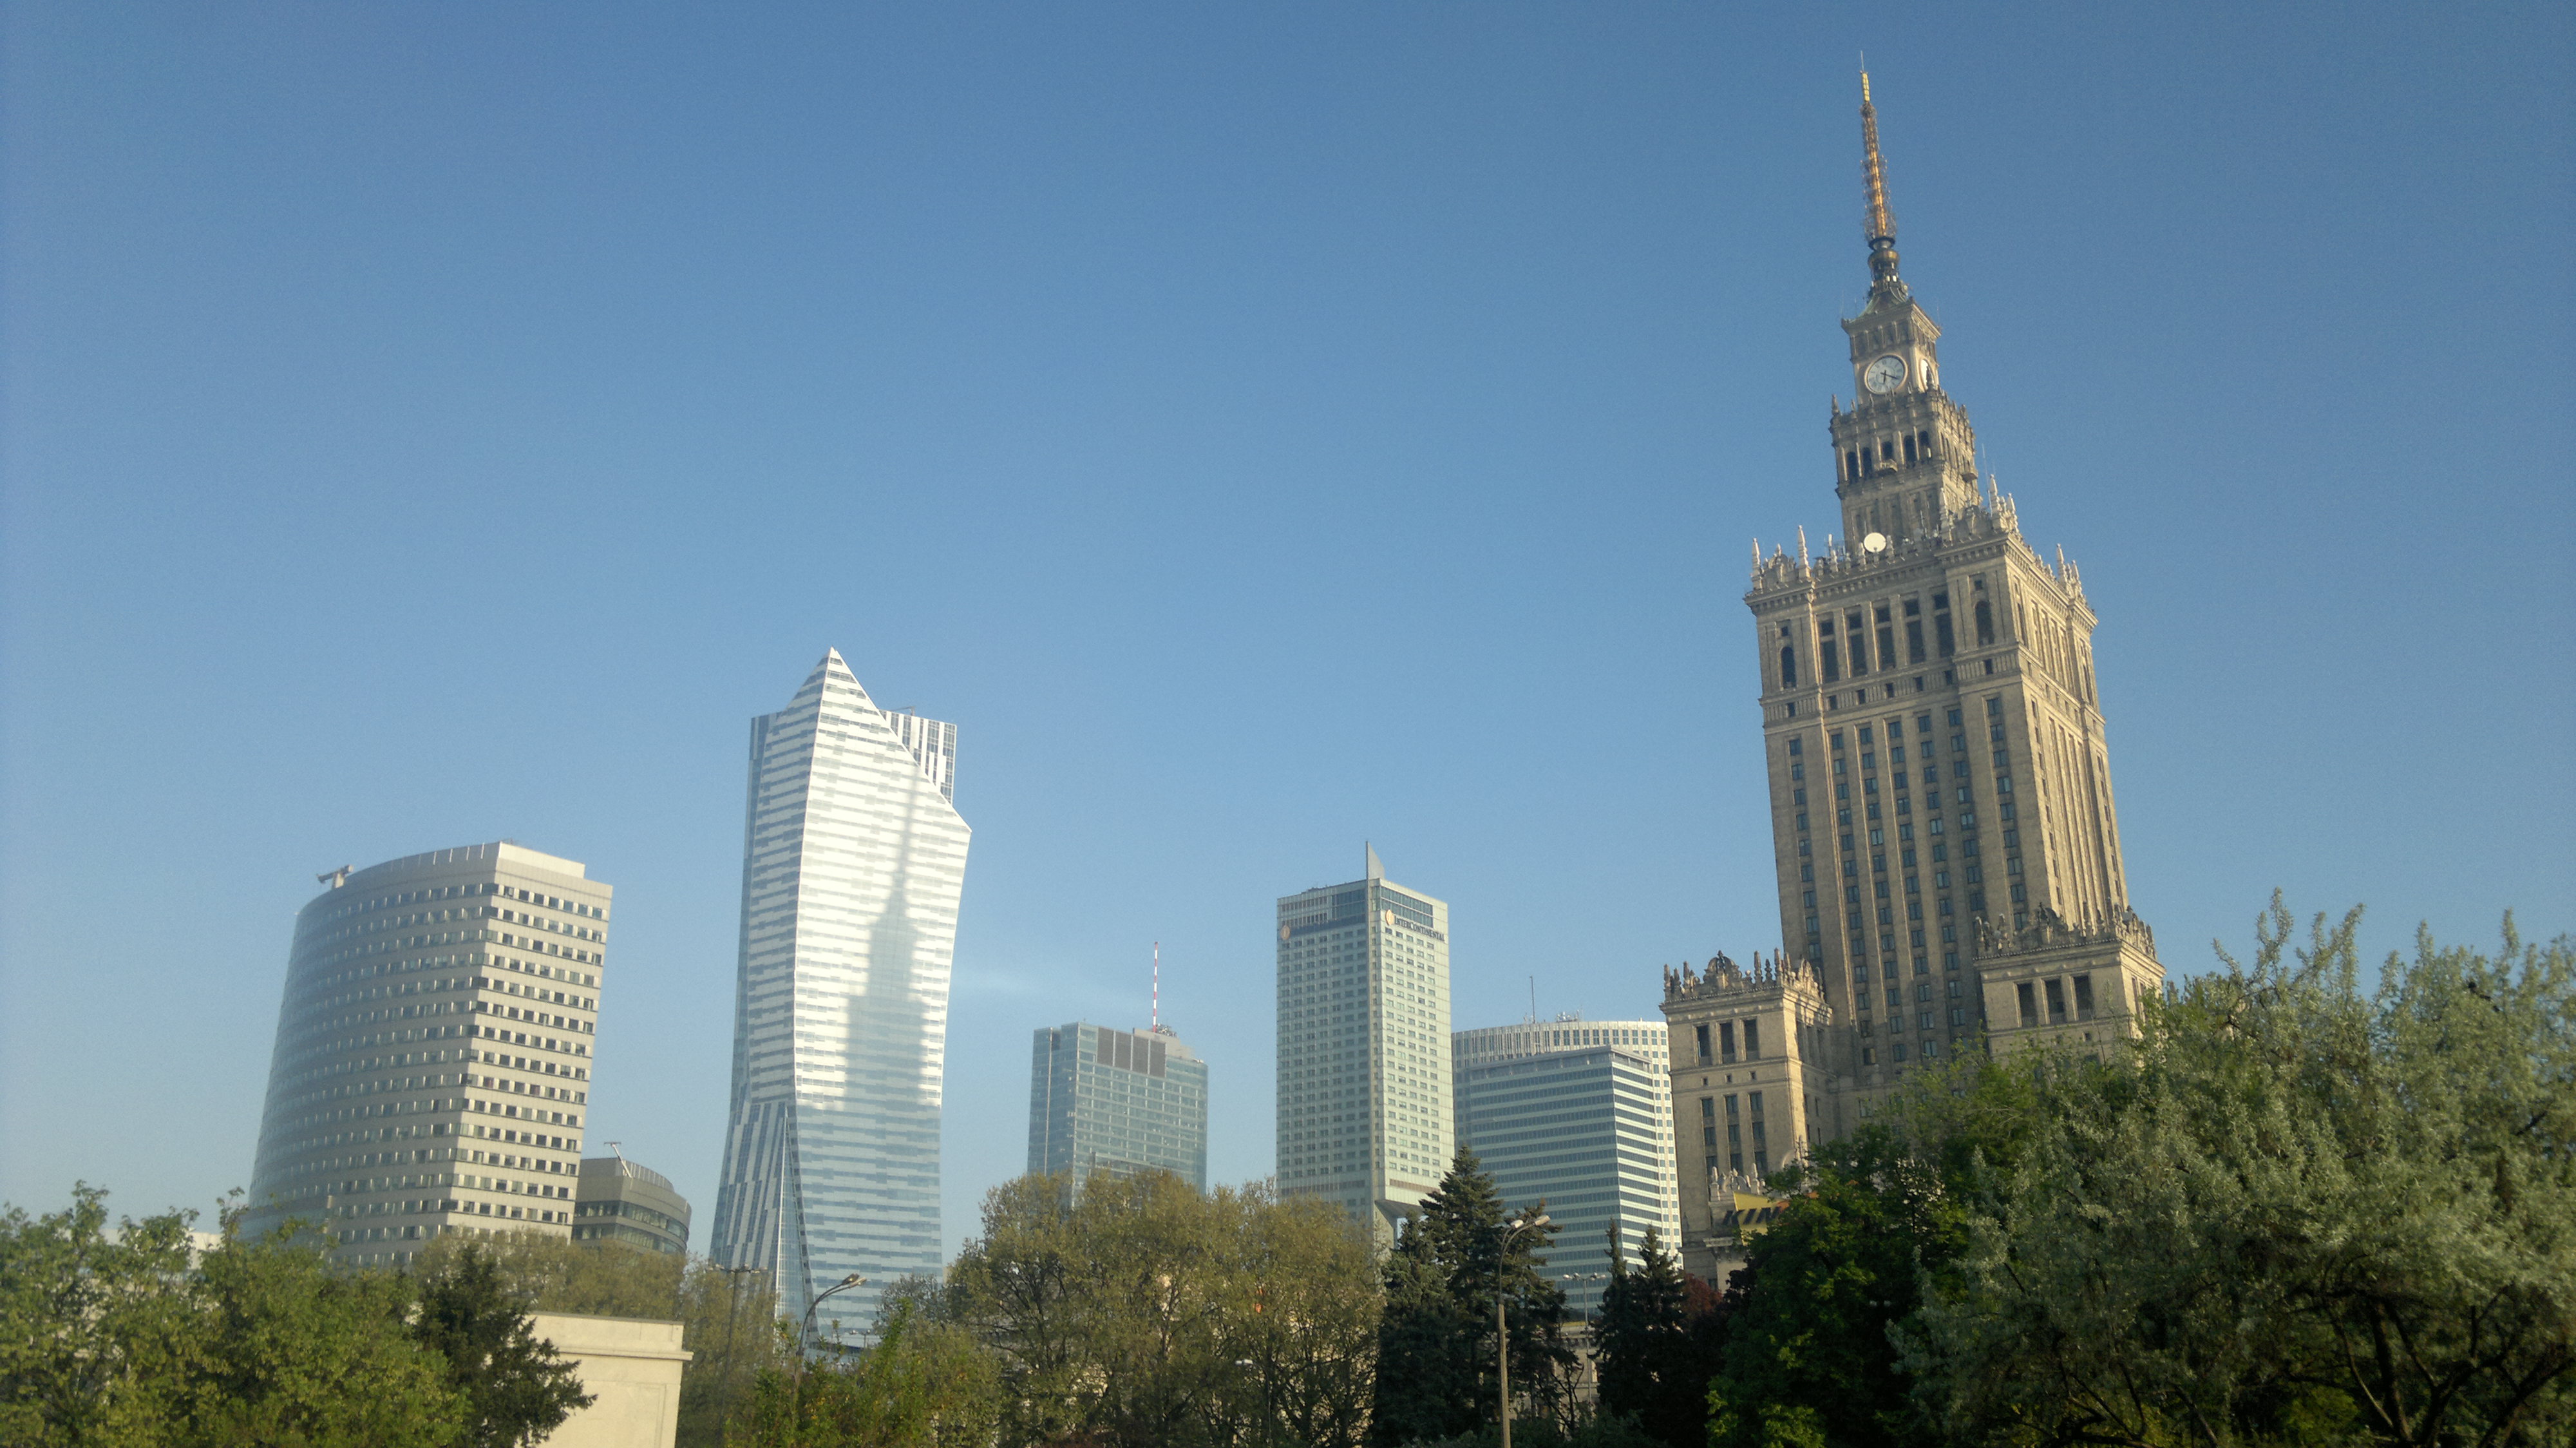 City Centre - Palace of Culture and Science (Palac Kultury i Nauky), Warsaw